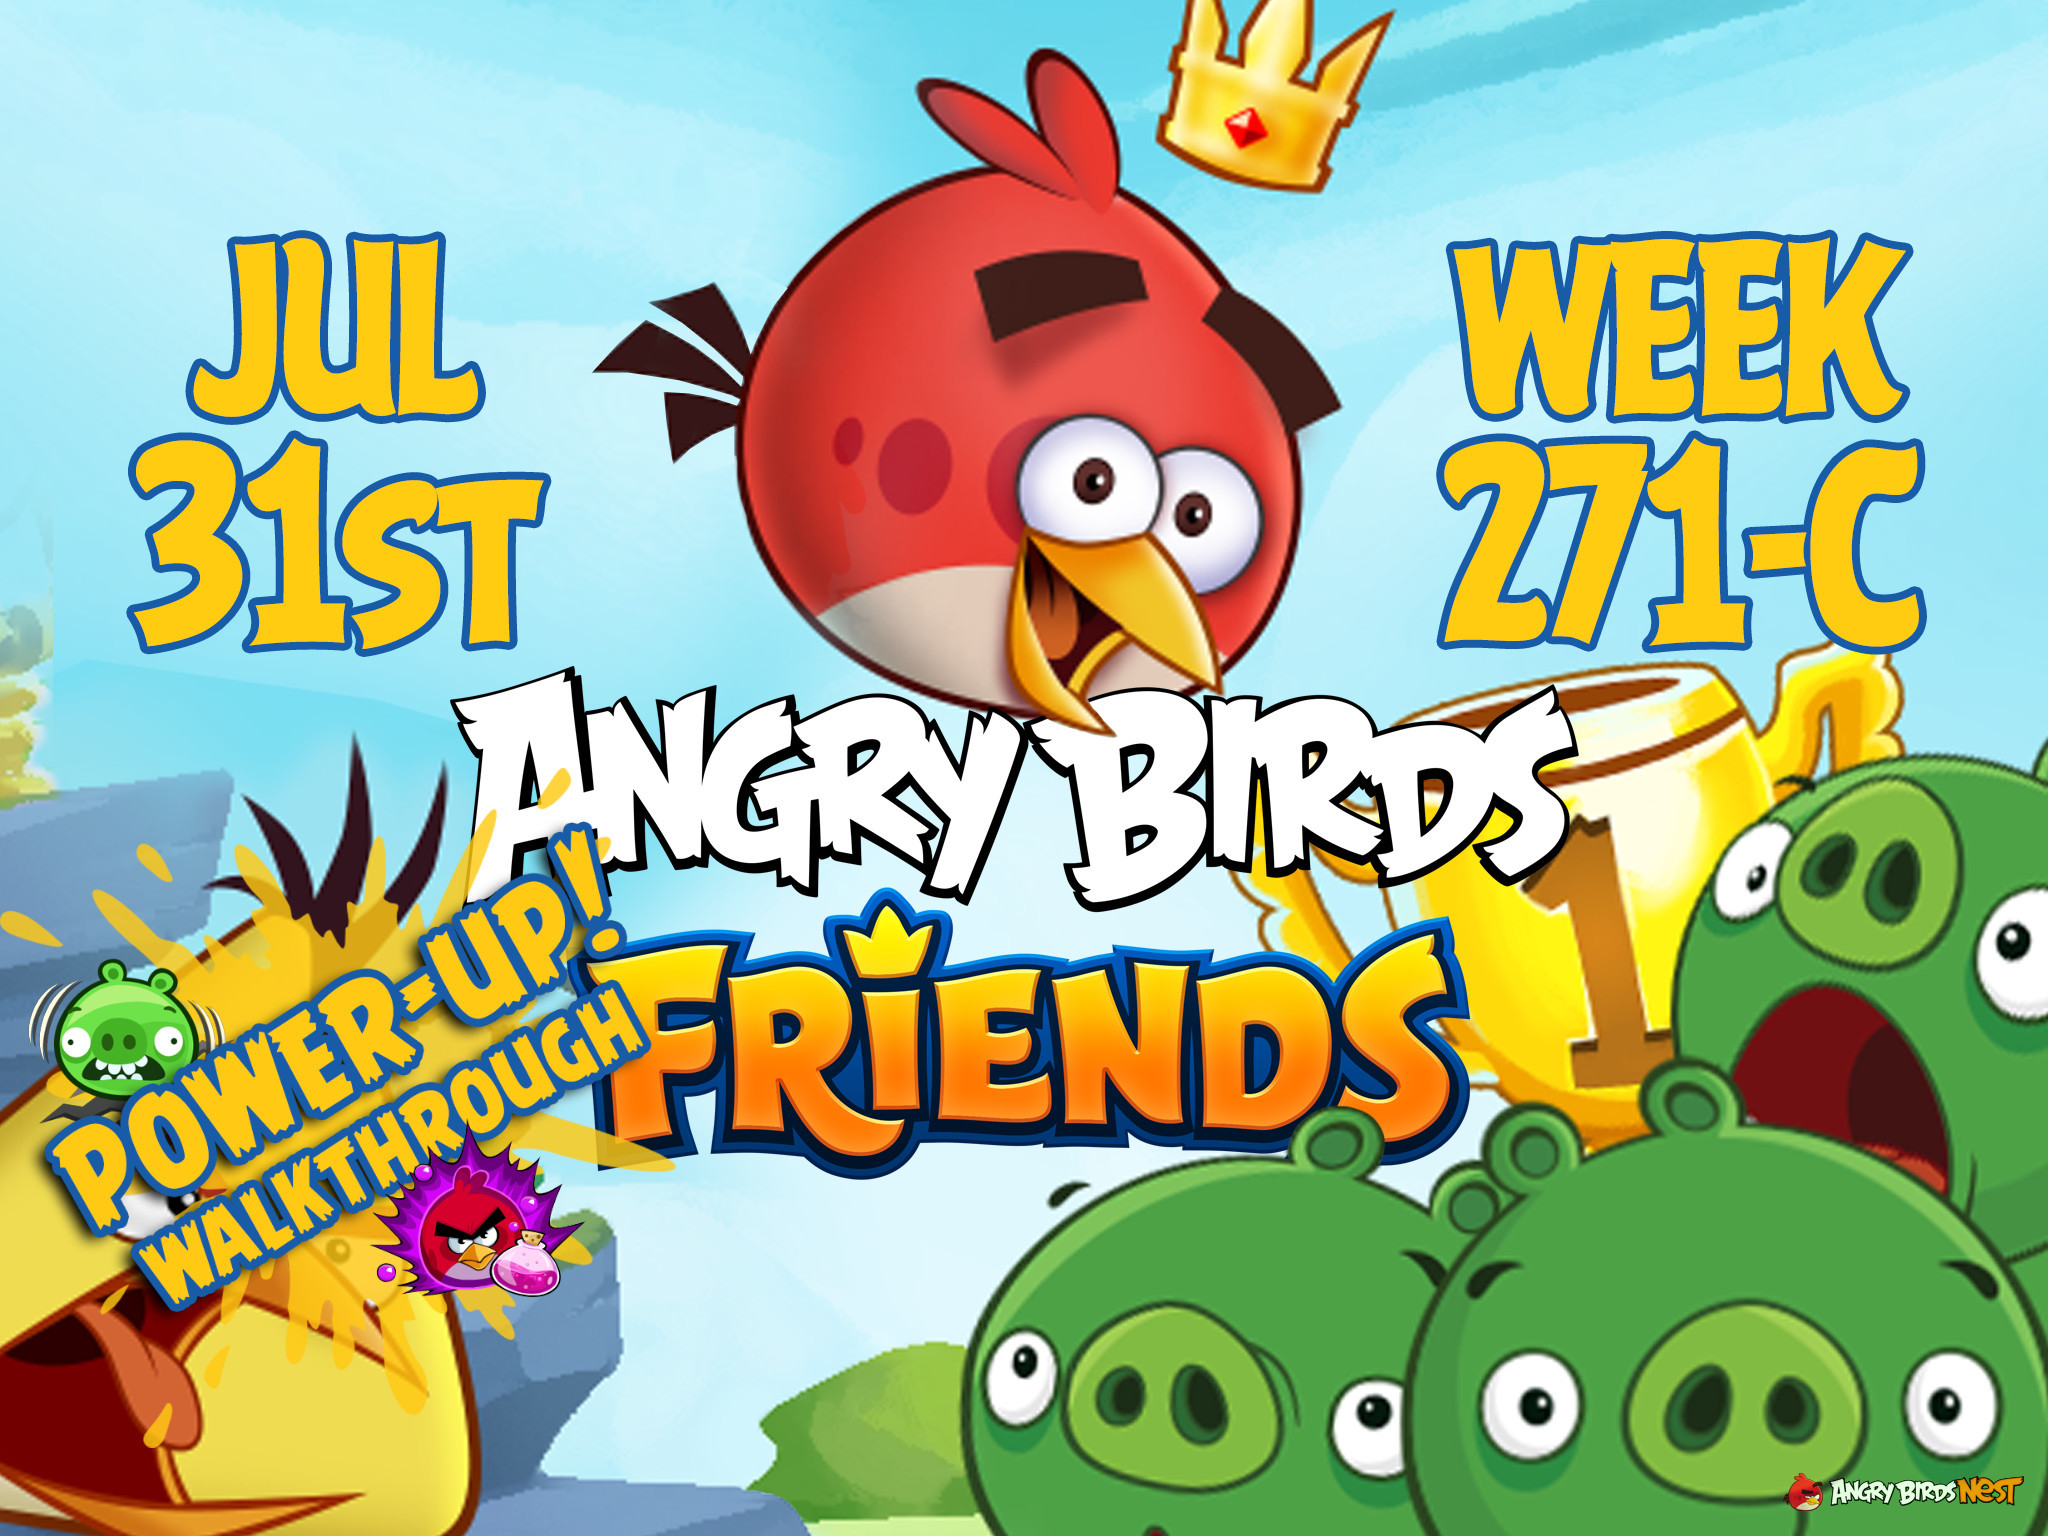 Angry Birds Friends Tournament Week 271-C Feature Image PU